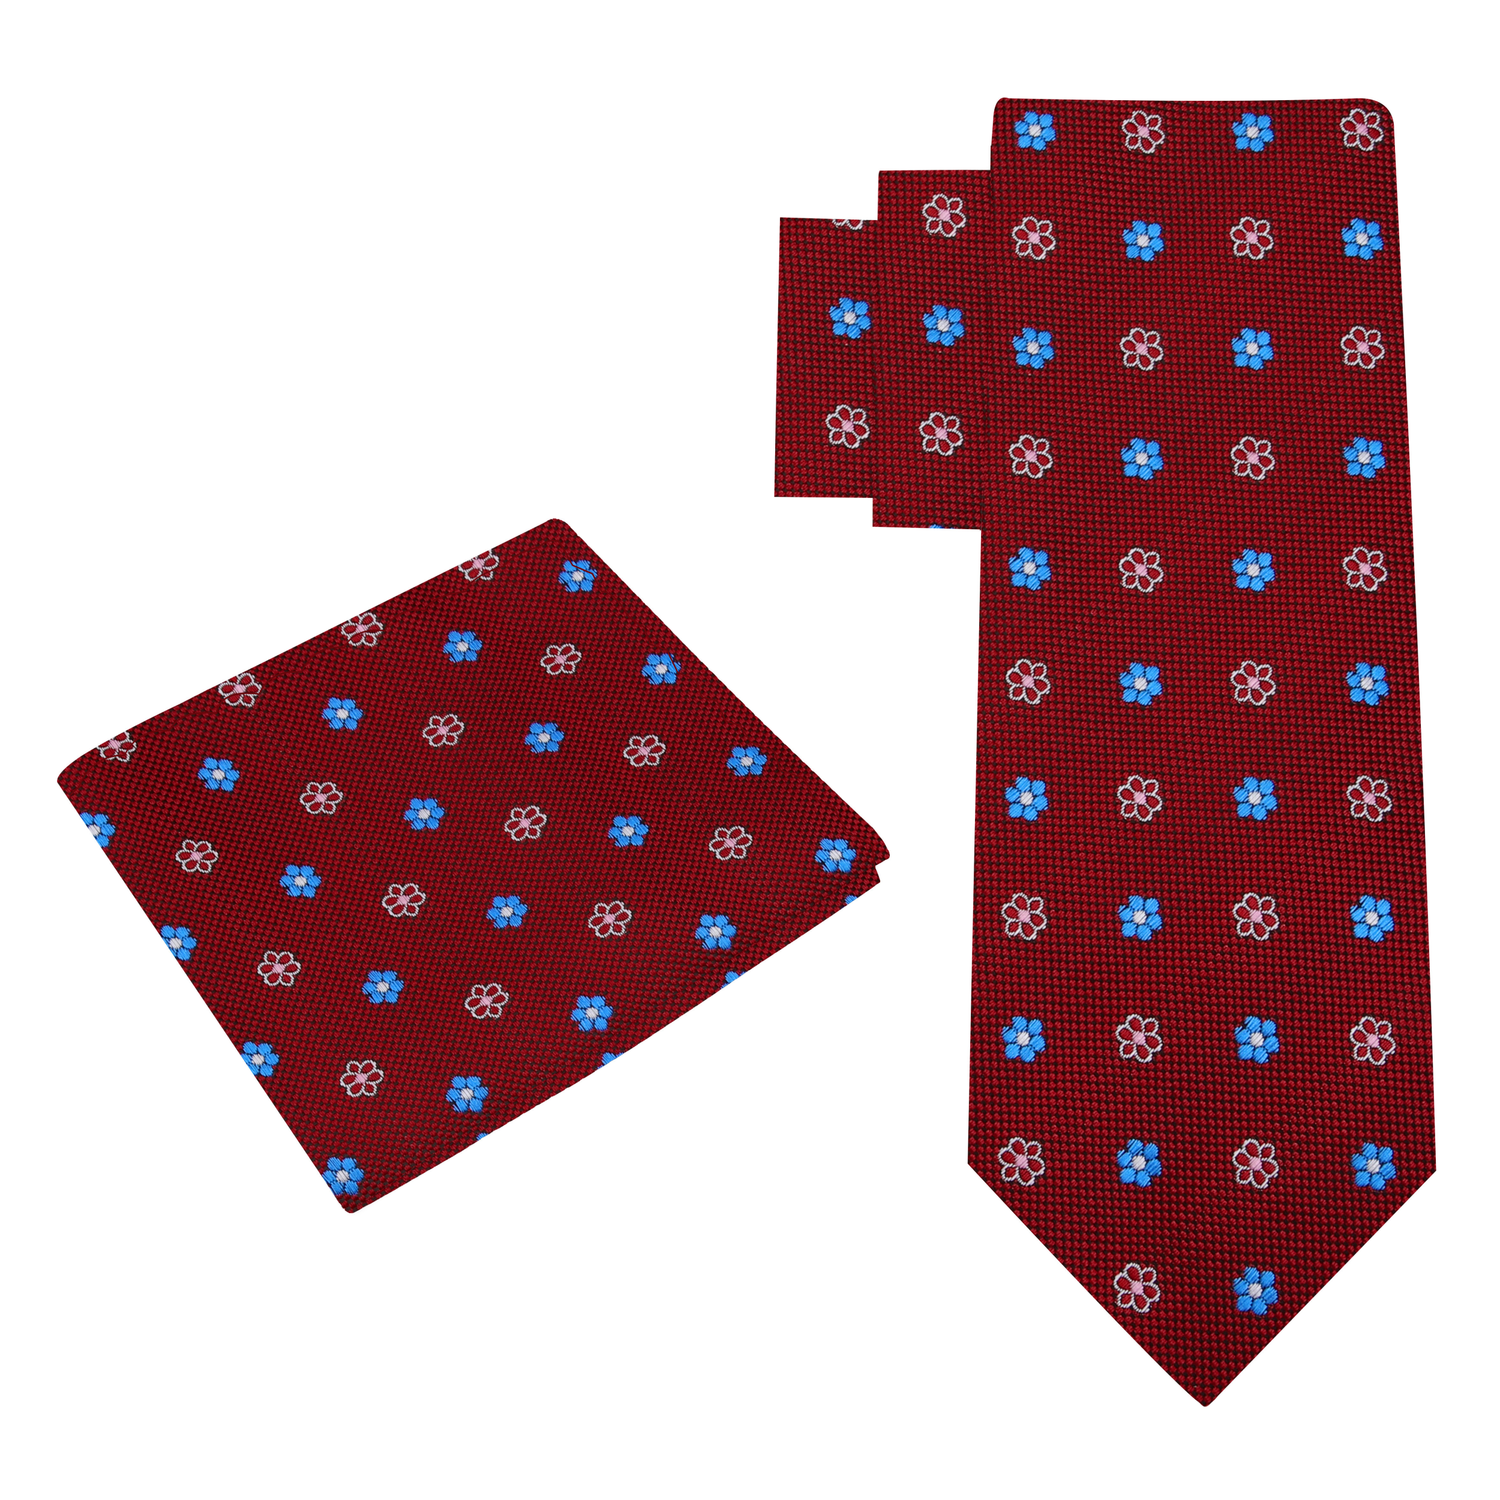 Alt View: Red, Blue, Pink Small Flower Necktie and Matching Square